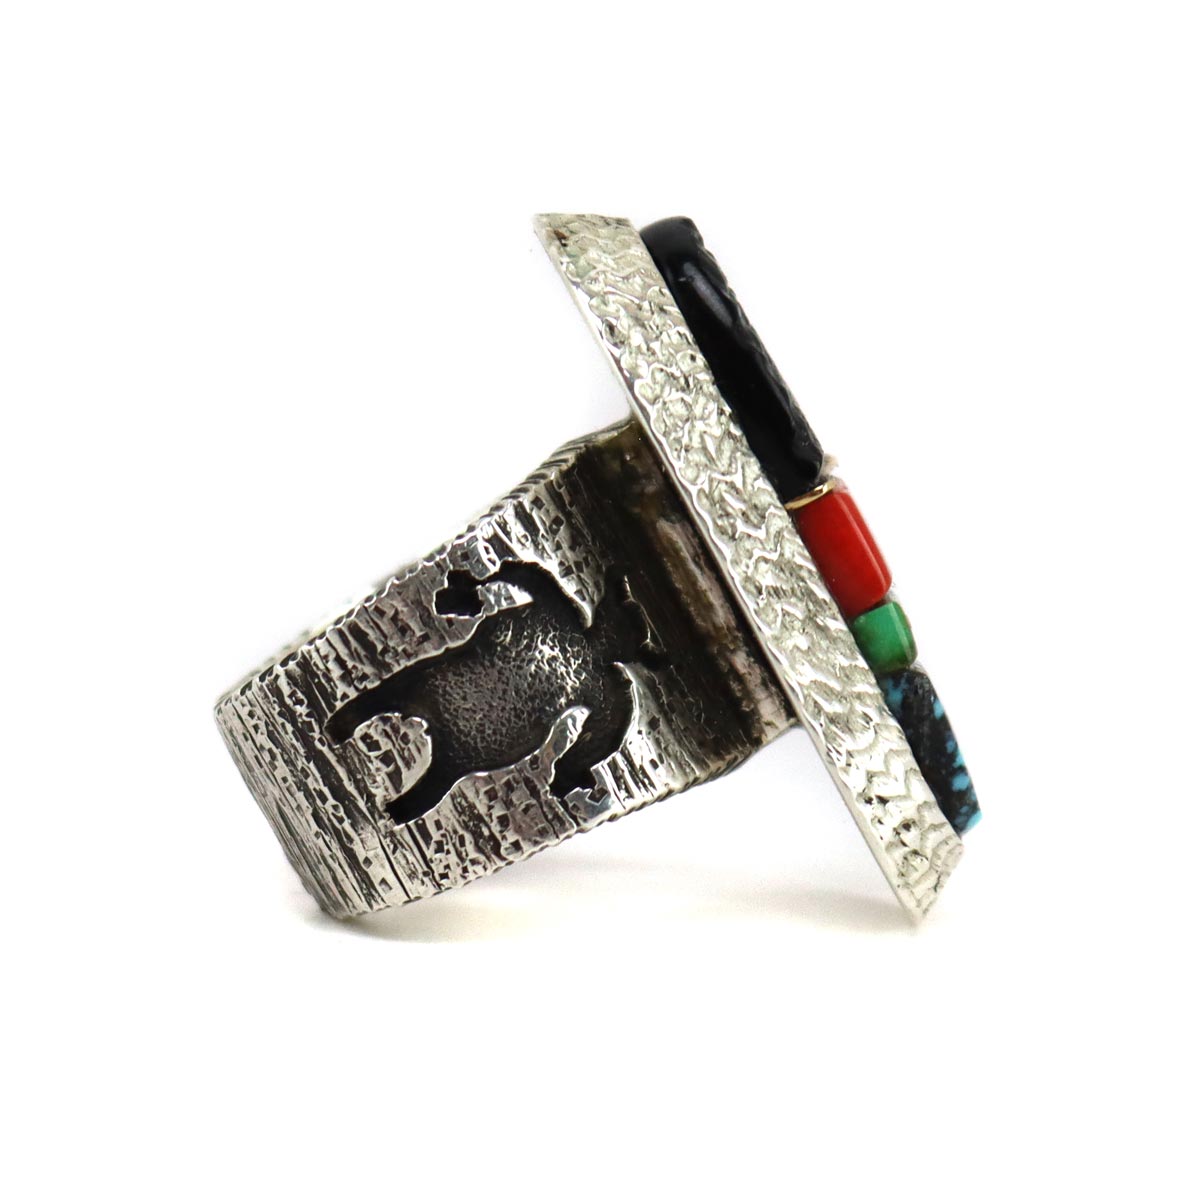 Alvin Yellowhorse (b. 1968) - Navajo Contemporary Multi-Stone Inlay, 18K Gold, and Silver Ring with Petroglyph Design, size 8